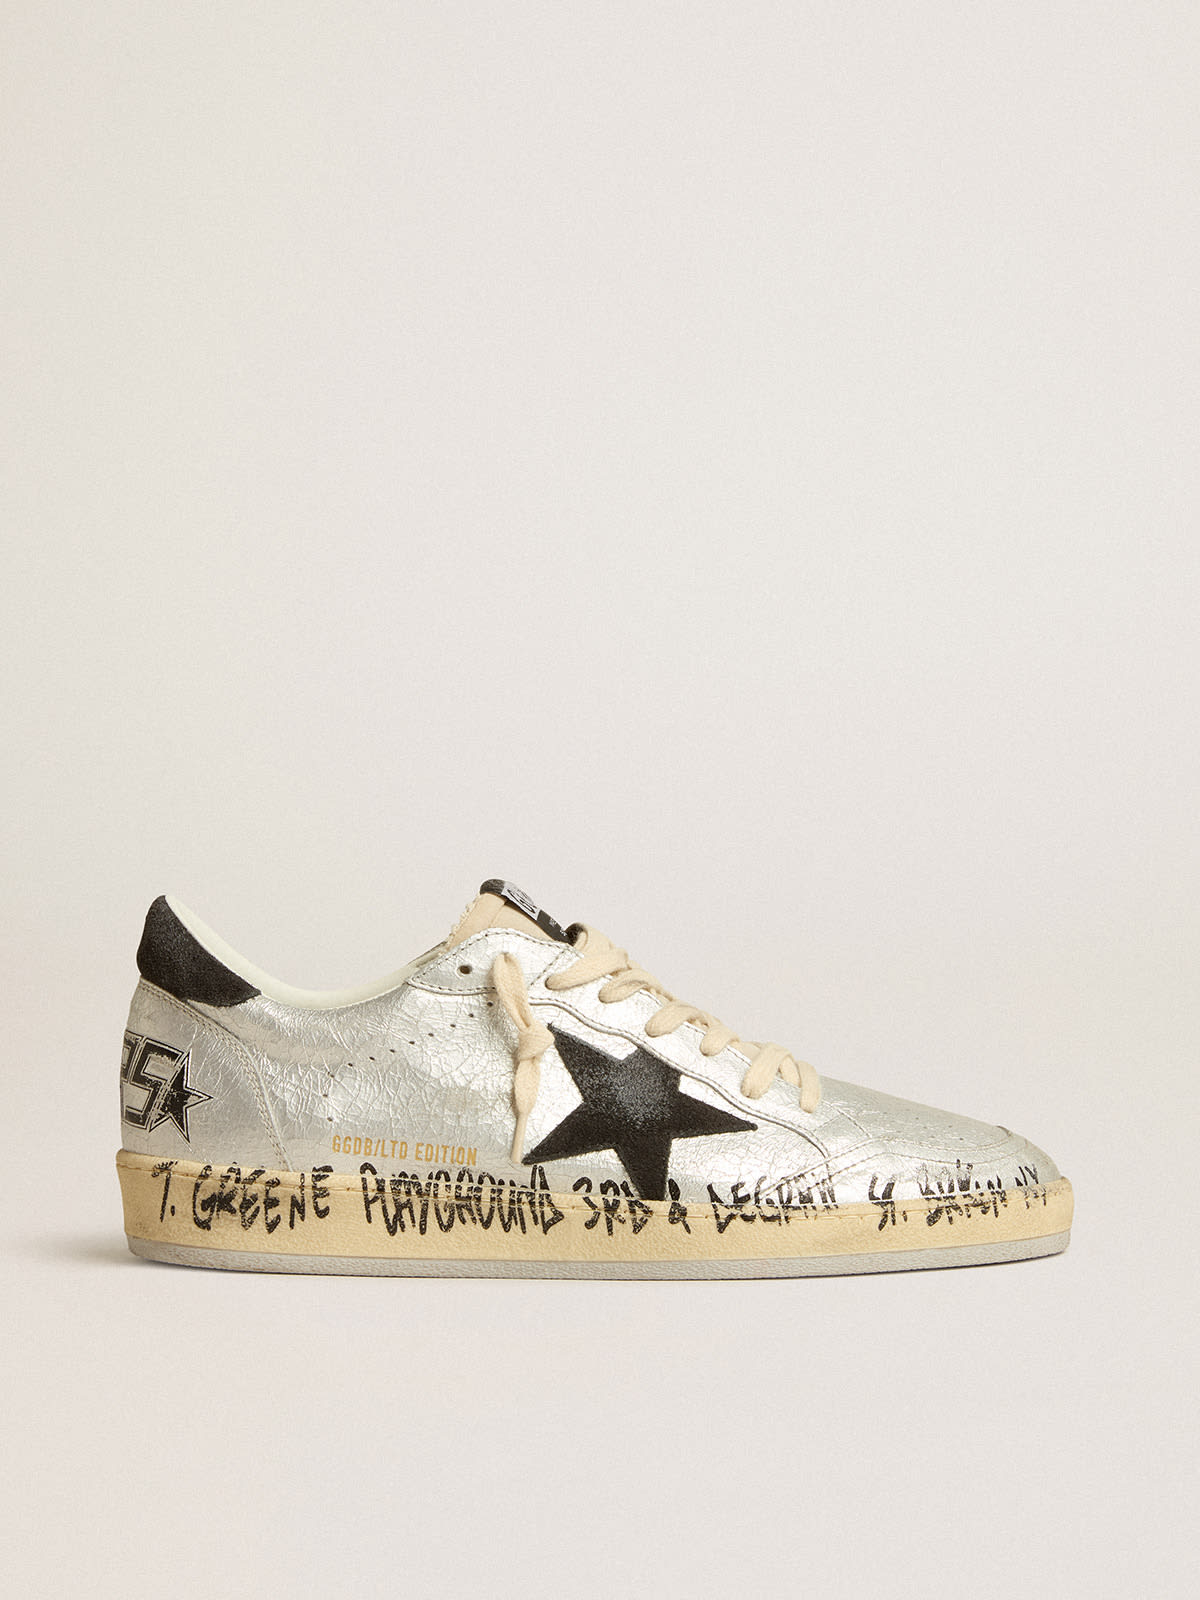 Golden Goose - Ball Star LTD in silver leather with gray suede star and heel tab in 